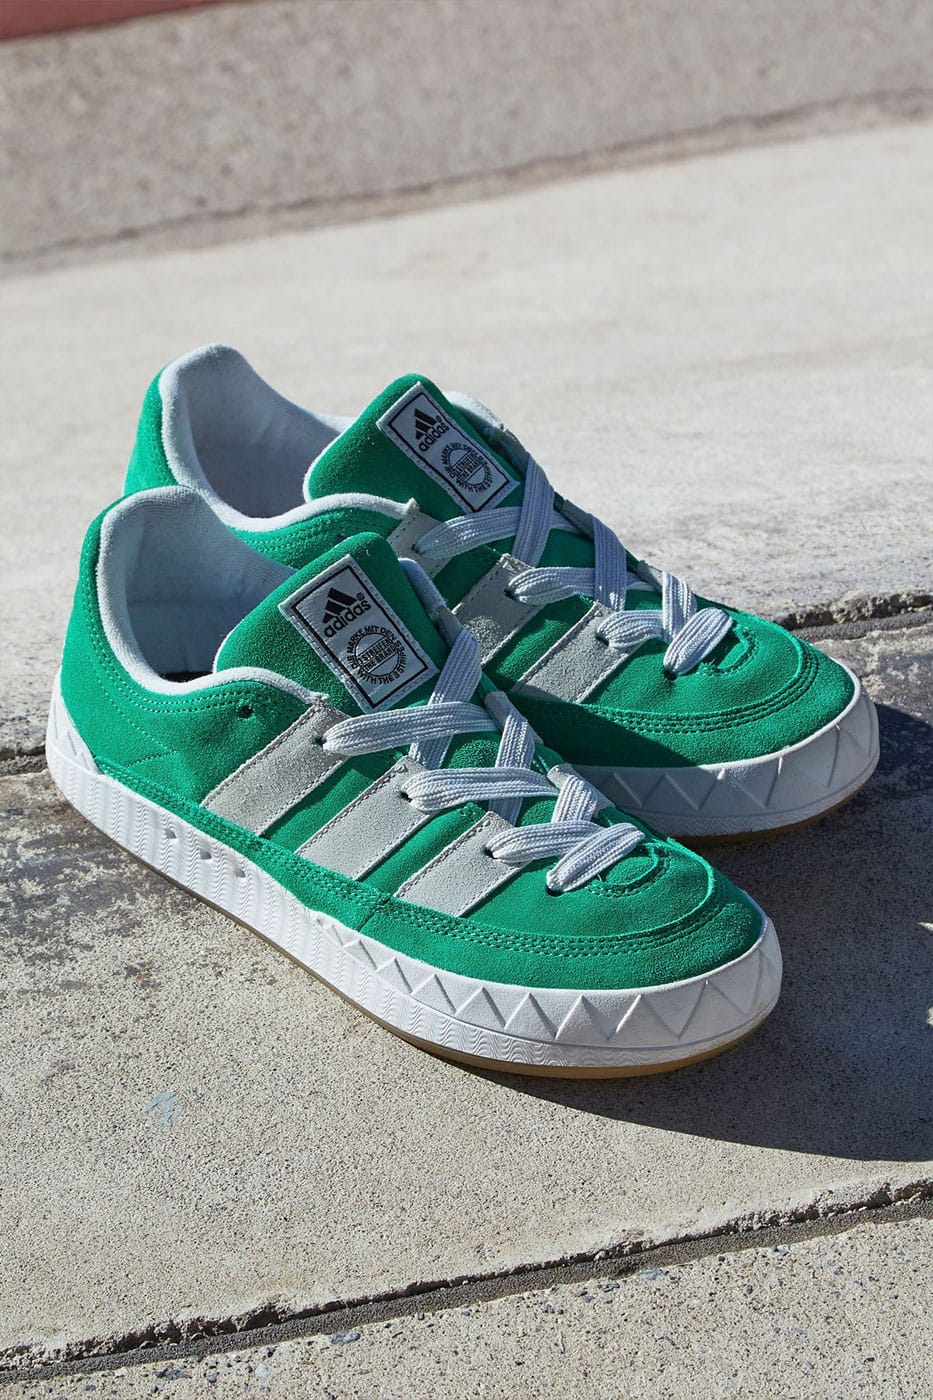 atmos to Re-Release the adidas Adimatic Skate Shoes | Hypebeast